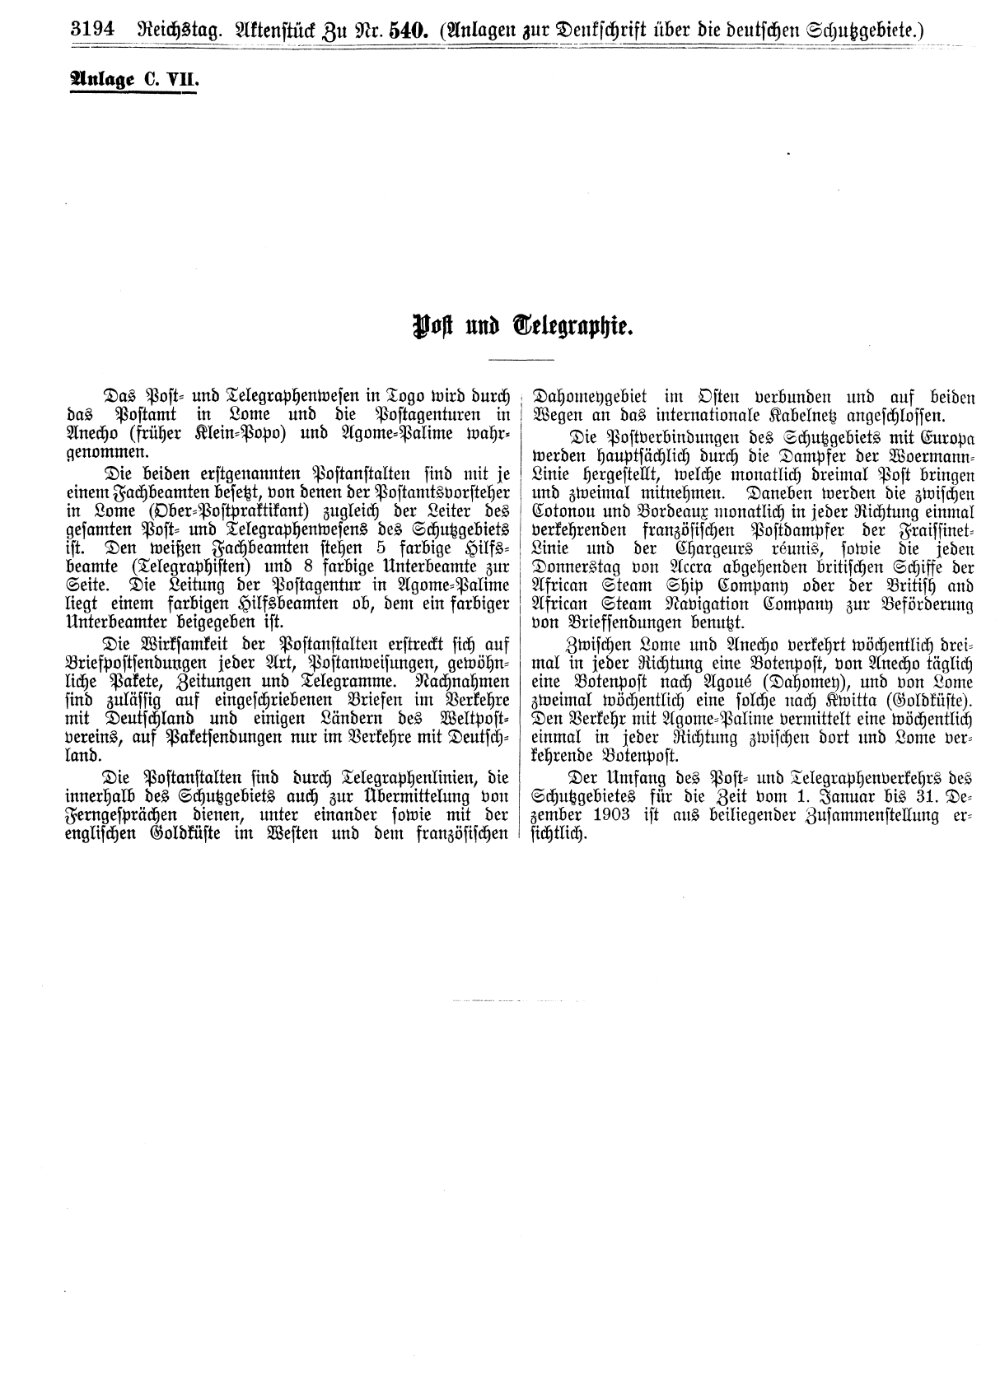 Scan of page 3194